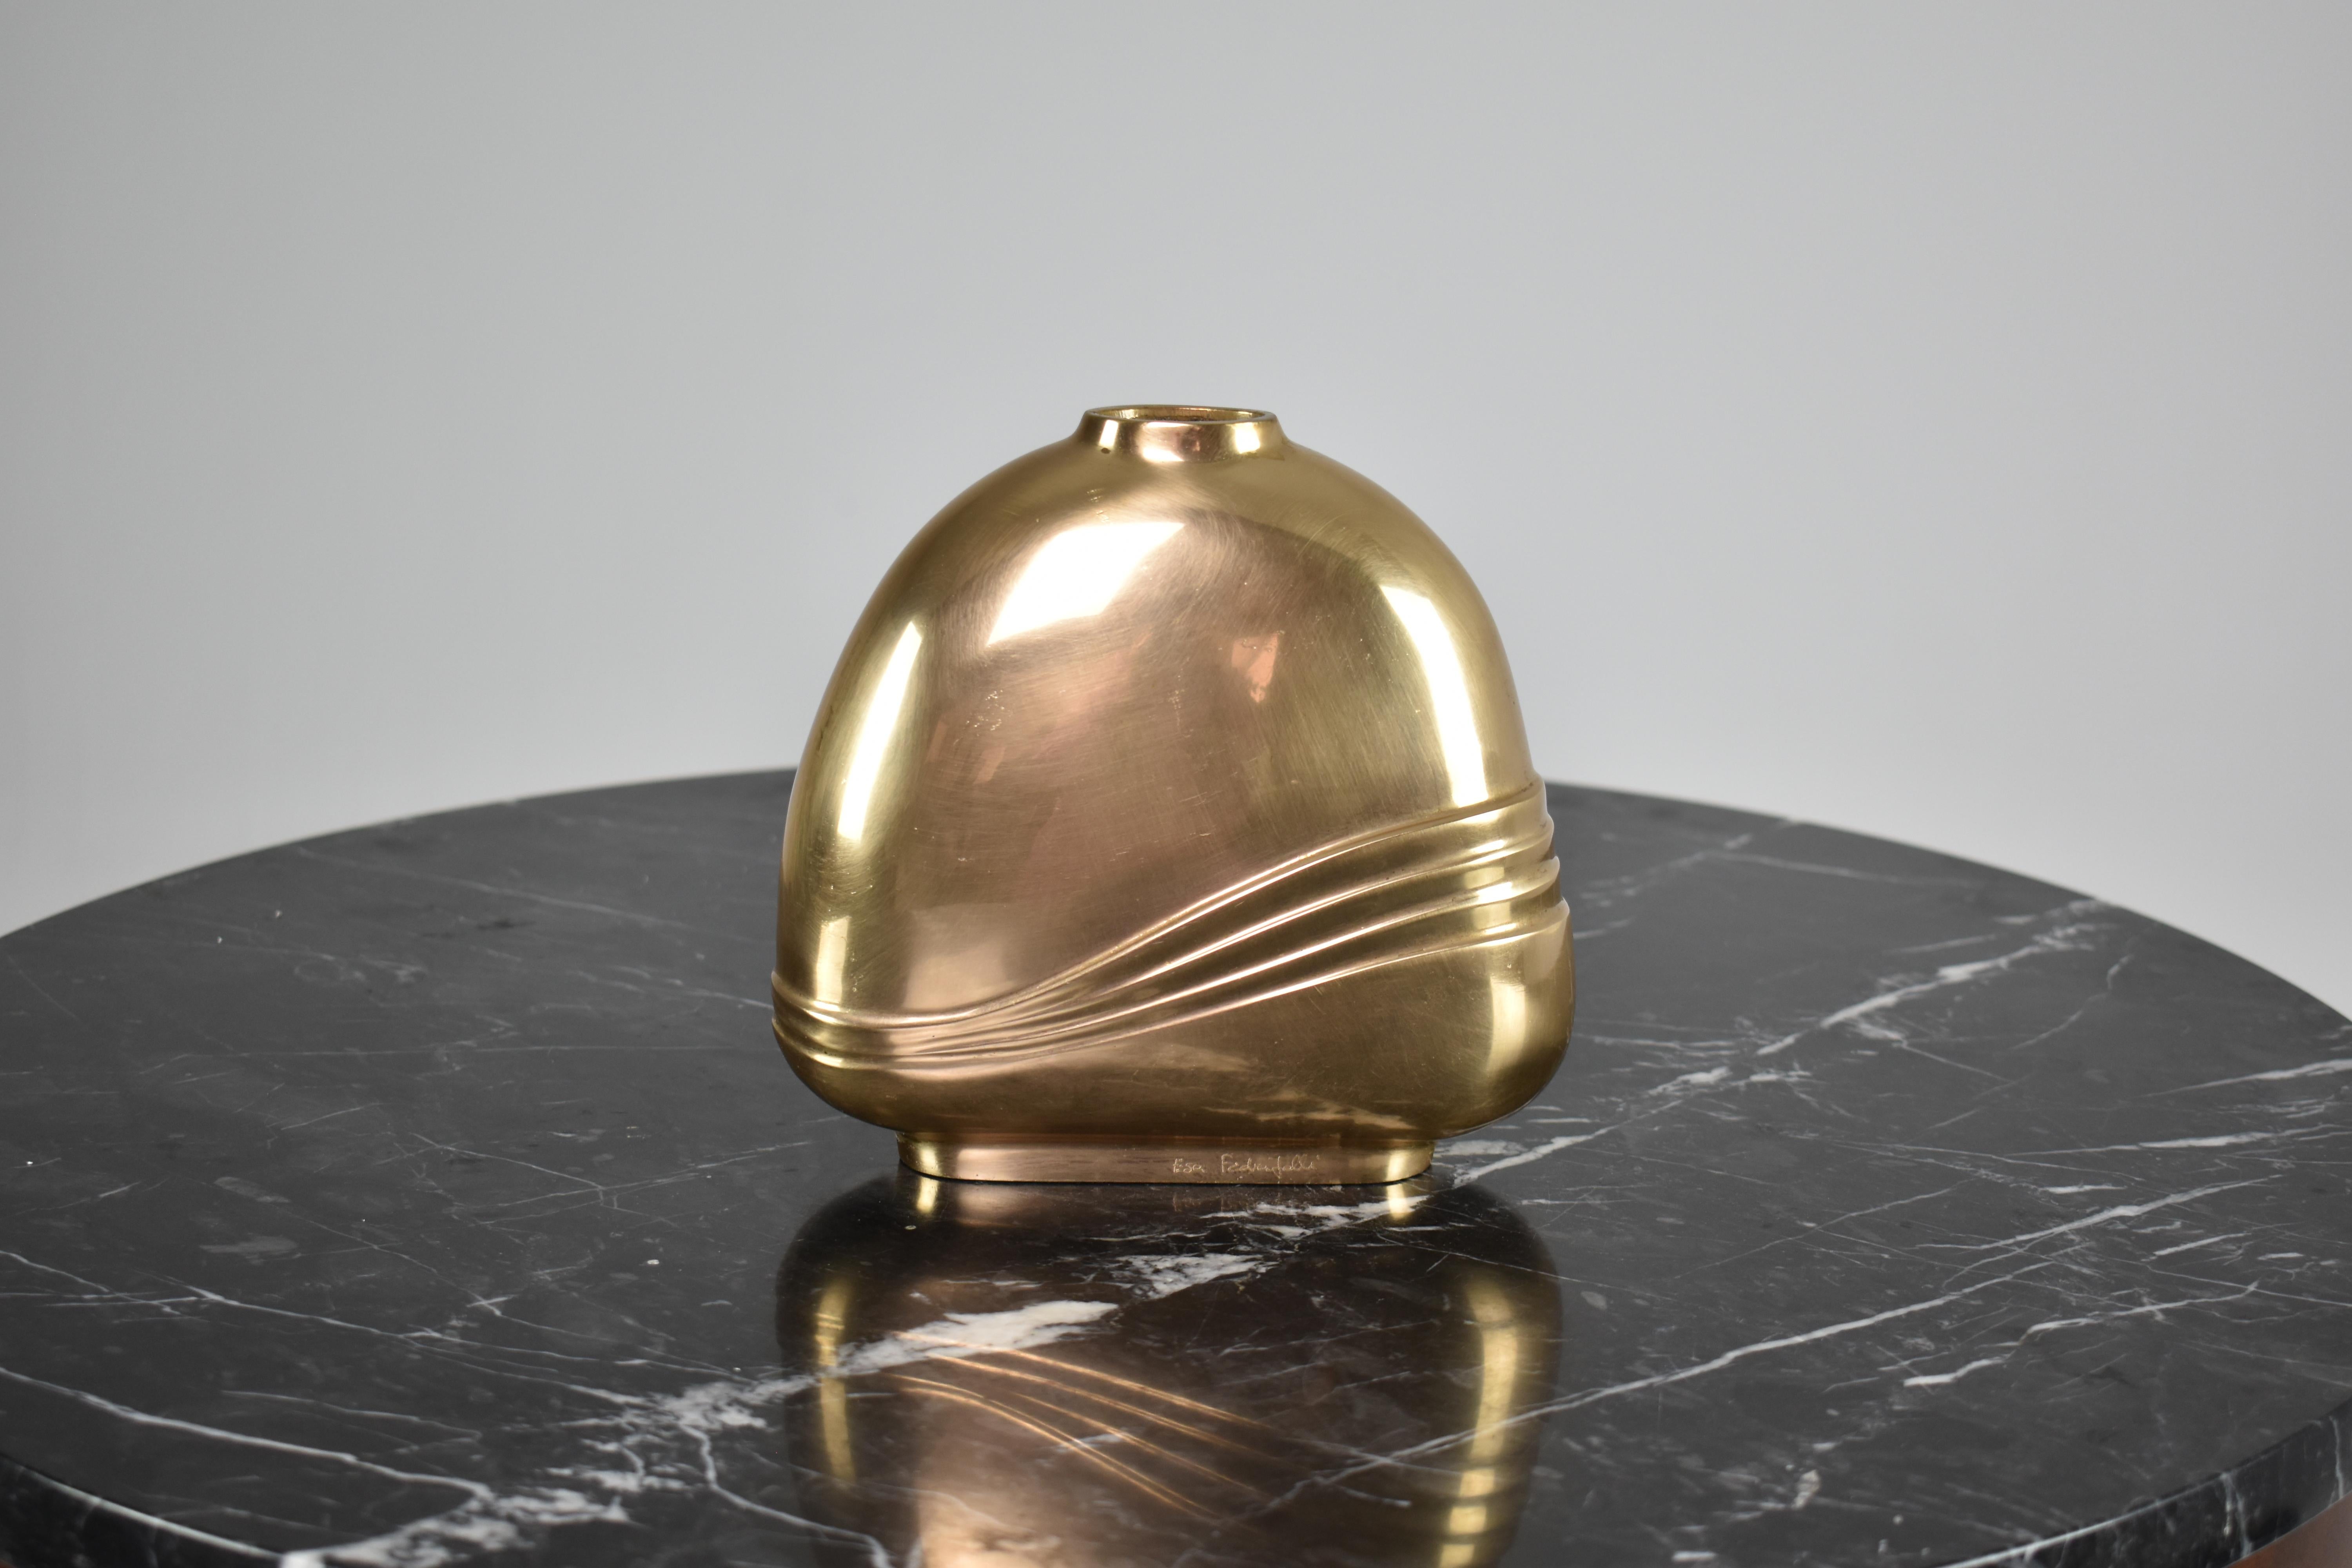 A beautiful bronze vase from the 1970s, handcrafted in Italy signed by the renowned artist Esa Fedrigolli. This organically shaped decorative piece features intricate engravings in the form of lines in the shape of waves. Its elegant design and